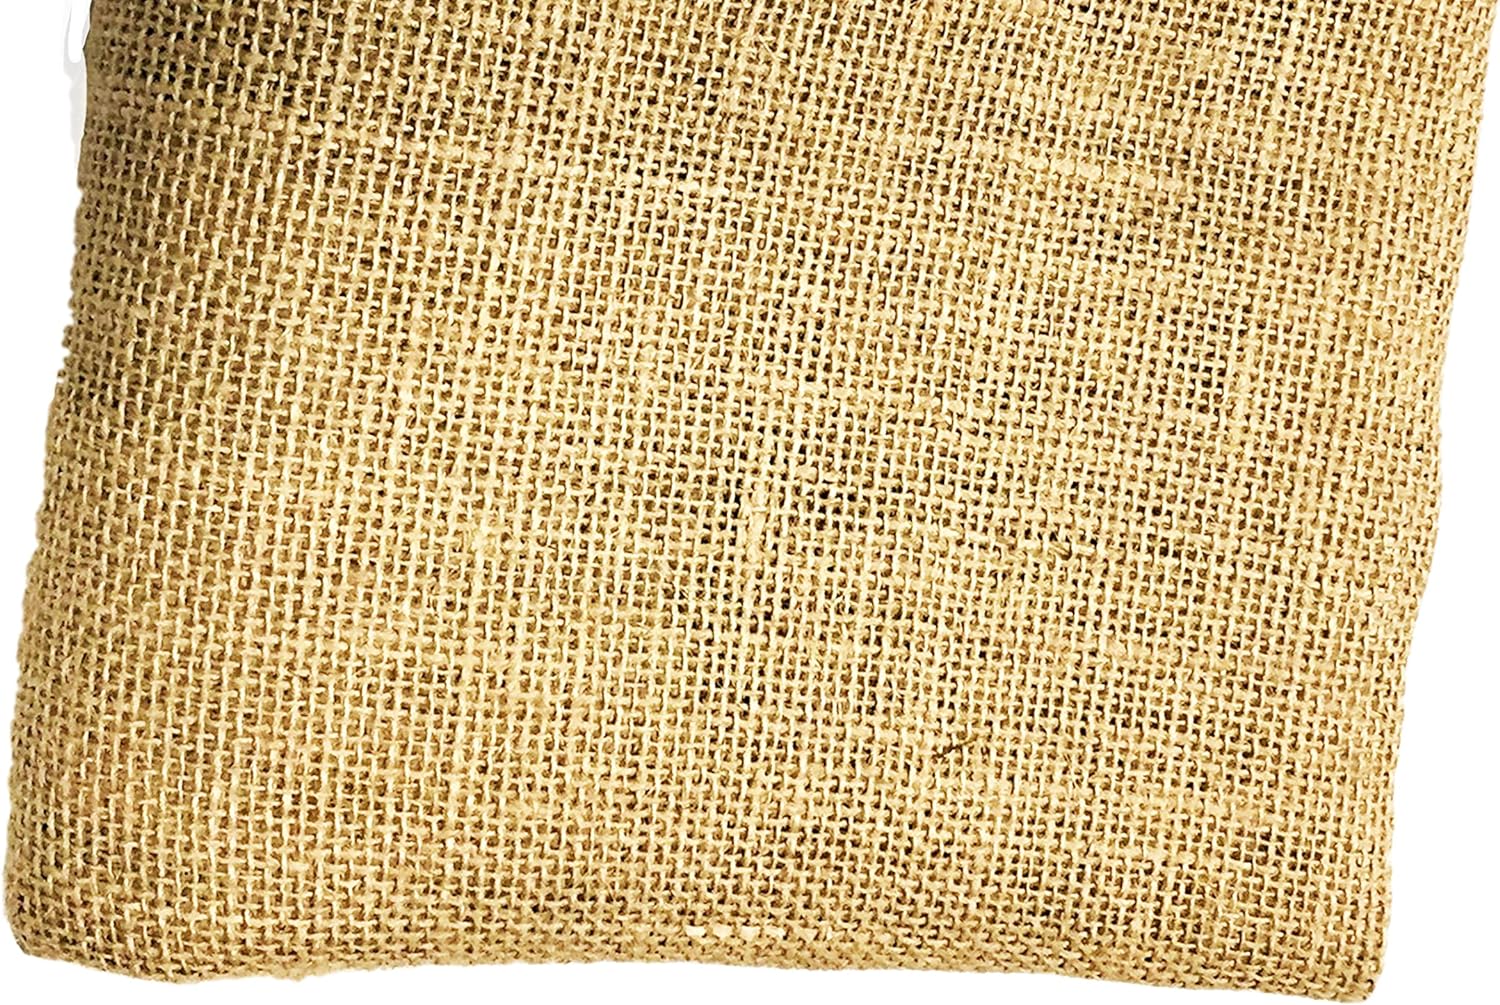 atural Burlap Fabric 72 Inches Wide